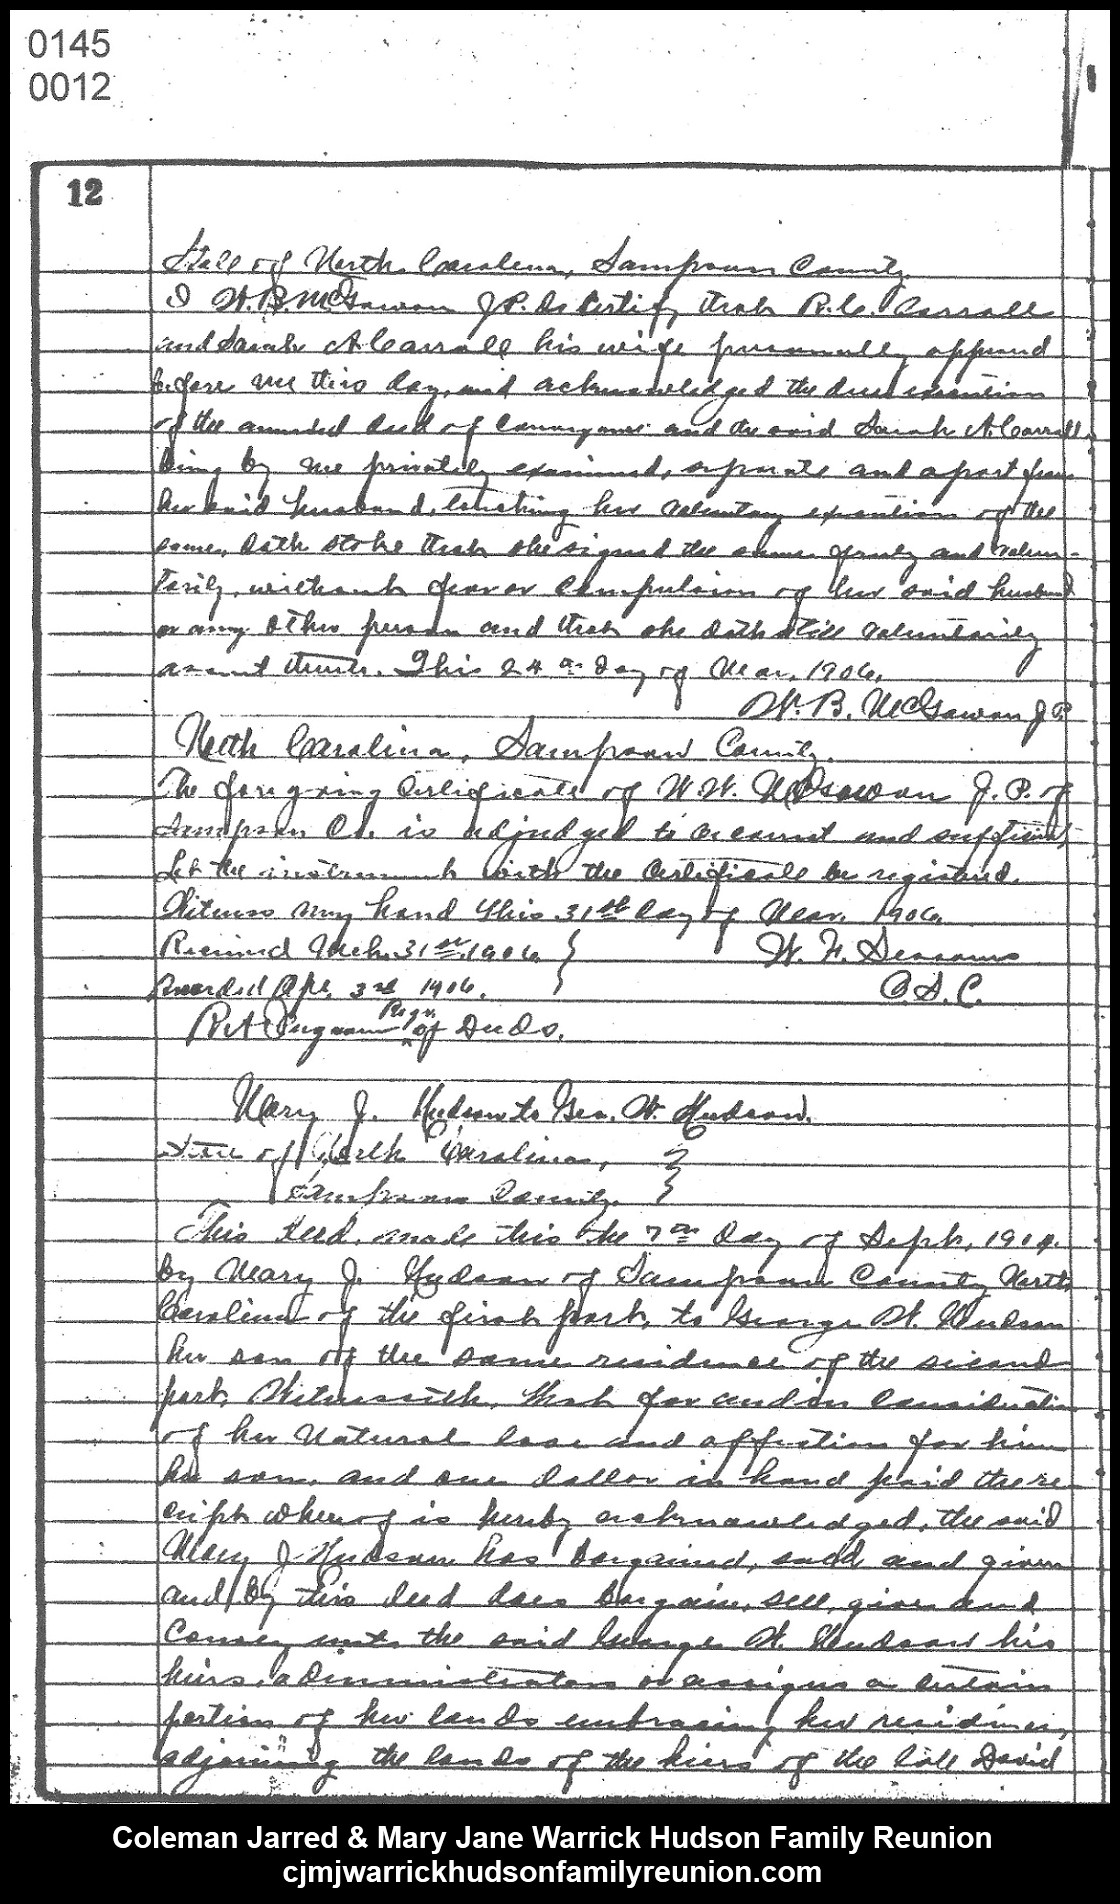 1906, 4-3 - Deed - MJ to George W. Hudson (page 1 of 3)